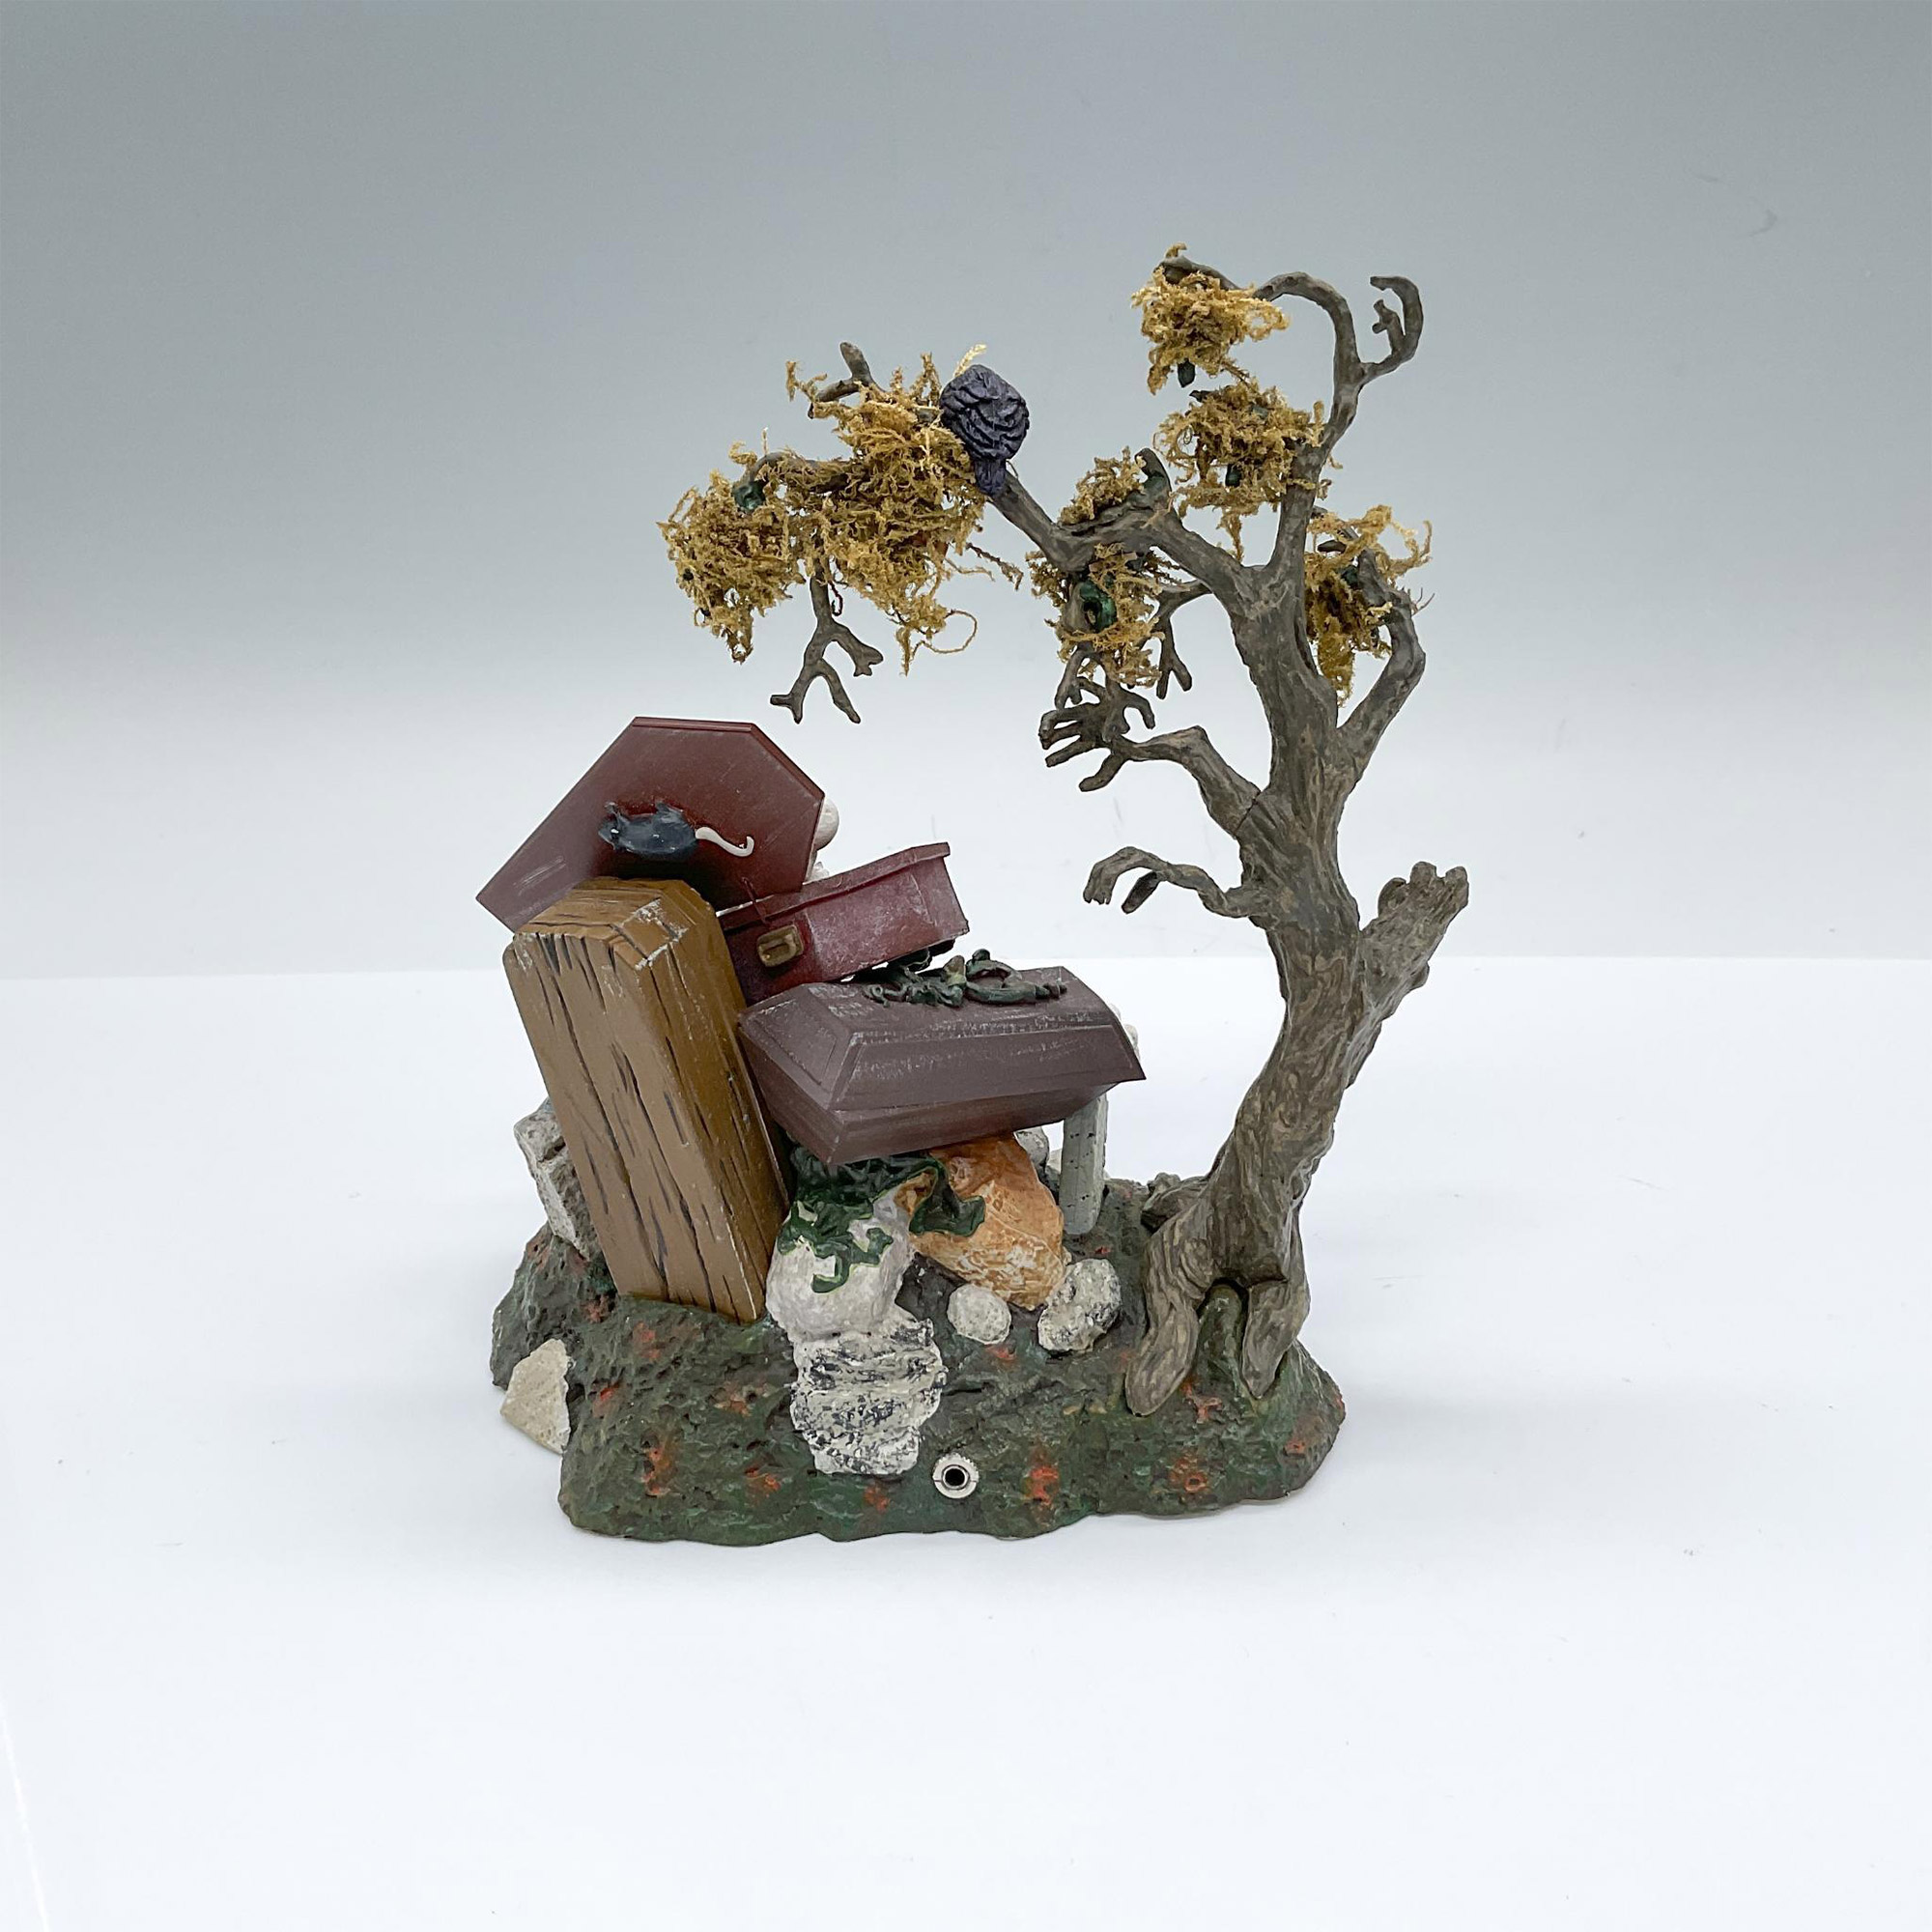 Department 56 Village Accessory, Animated Haunted Graveyard - Image 2 of 4